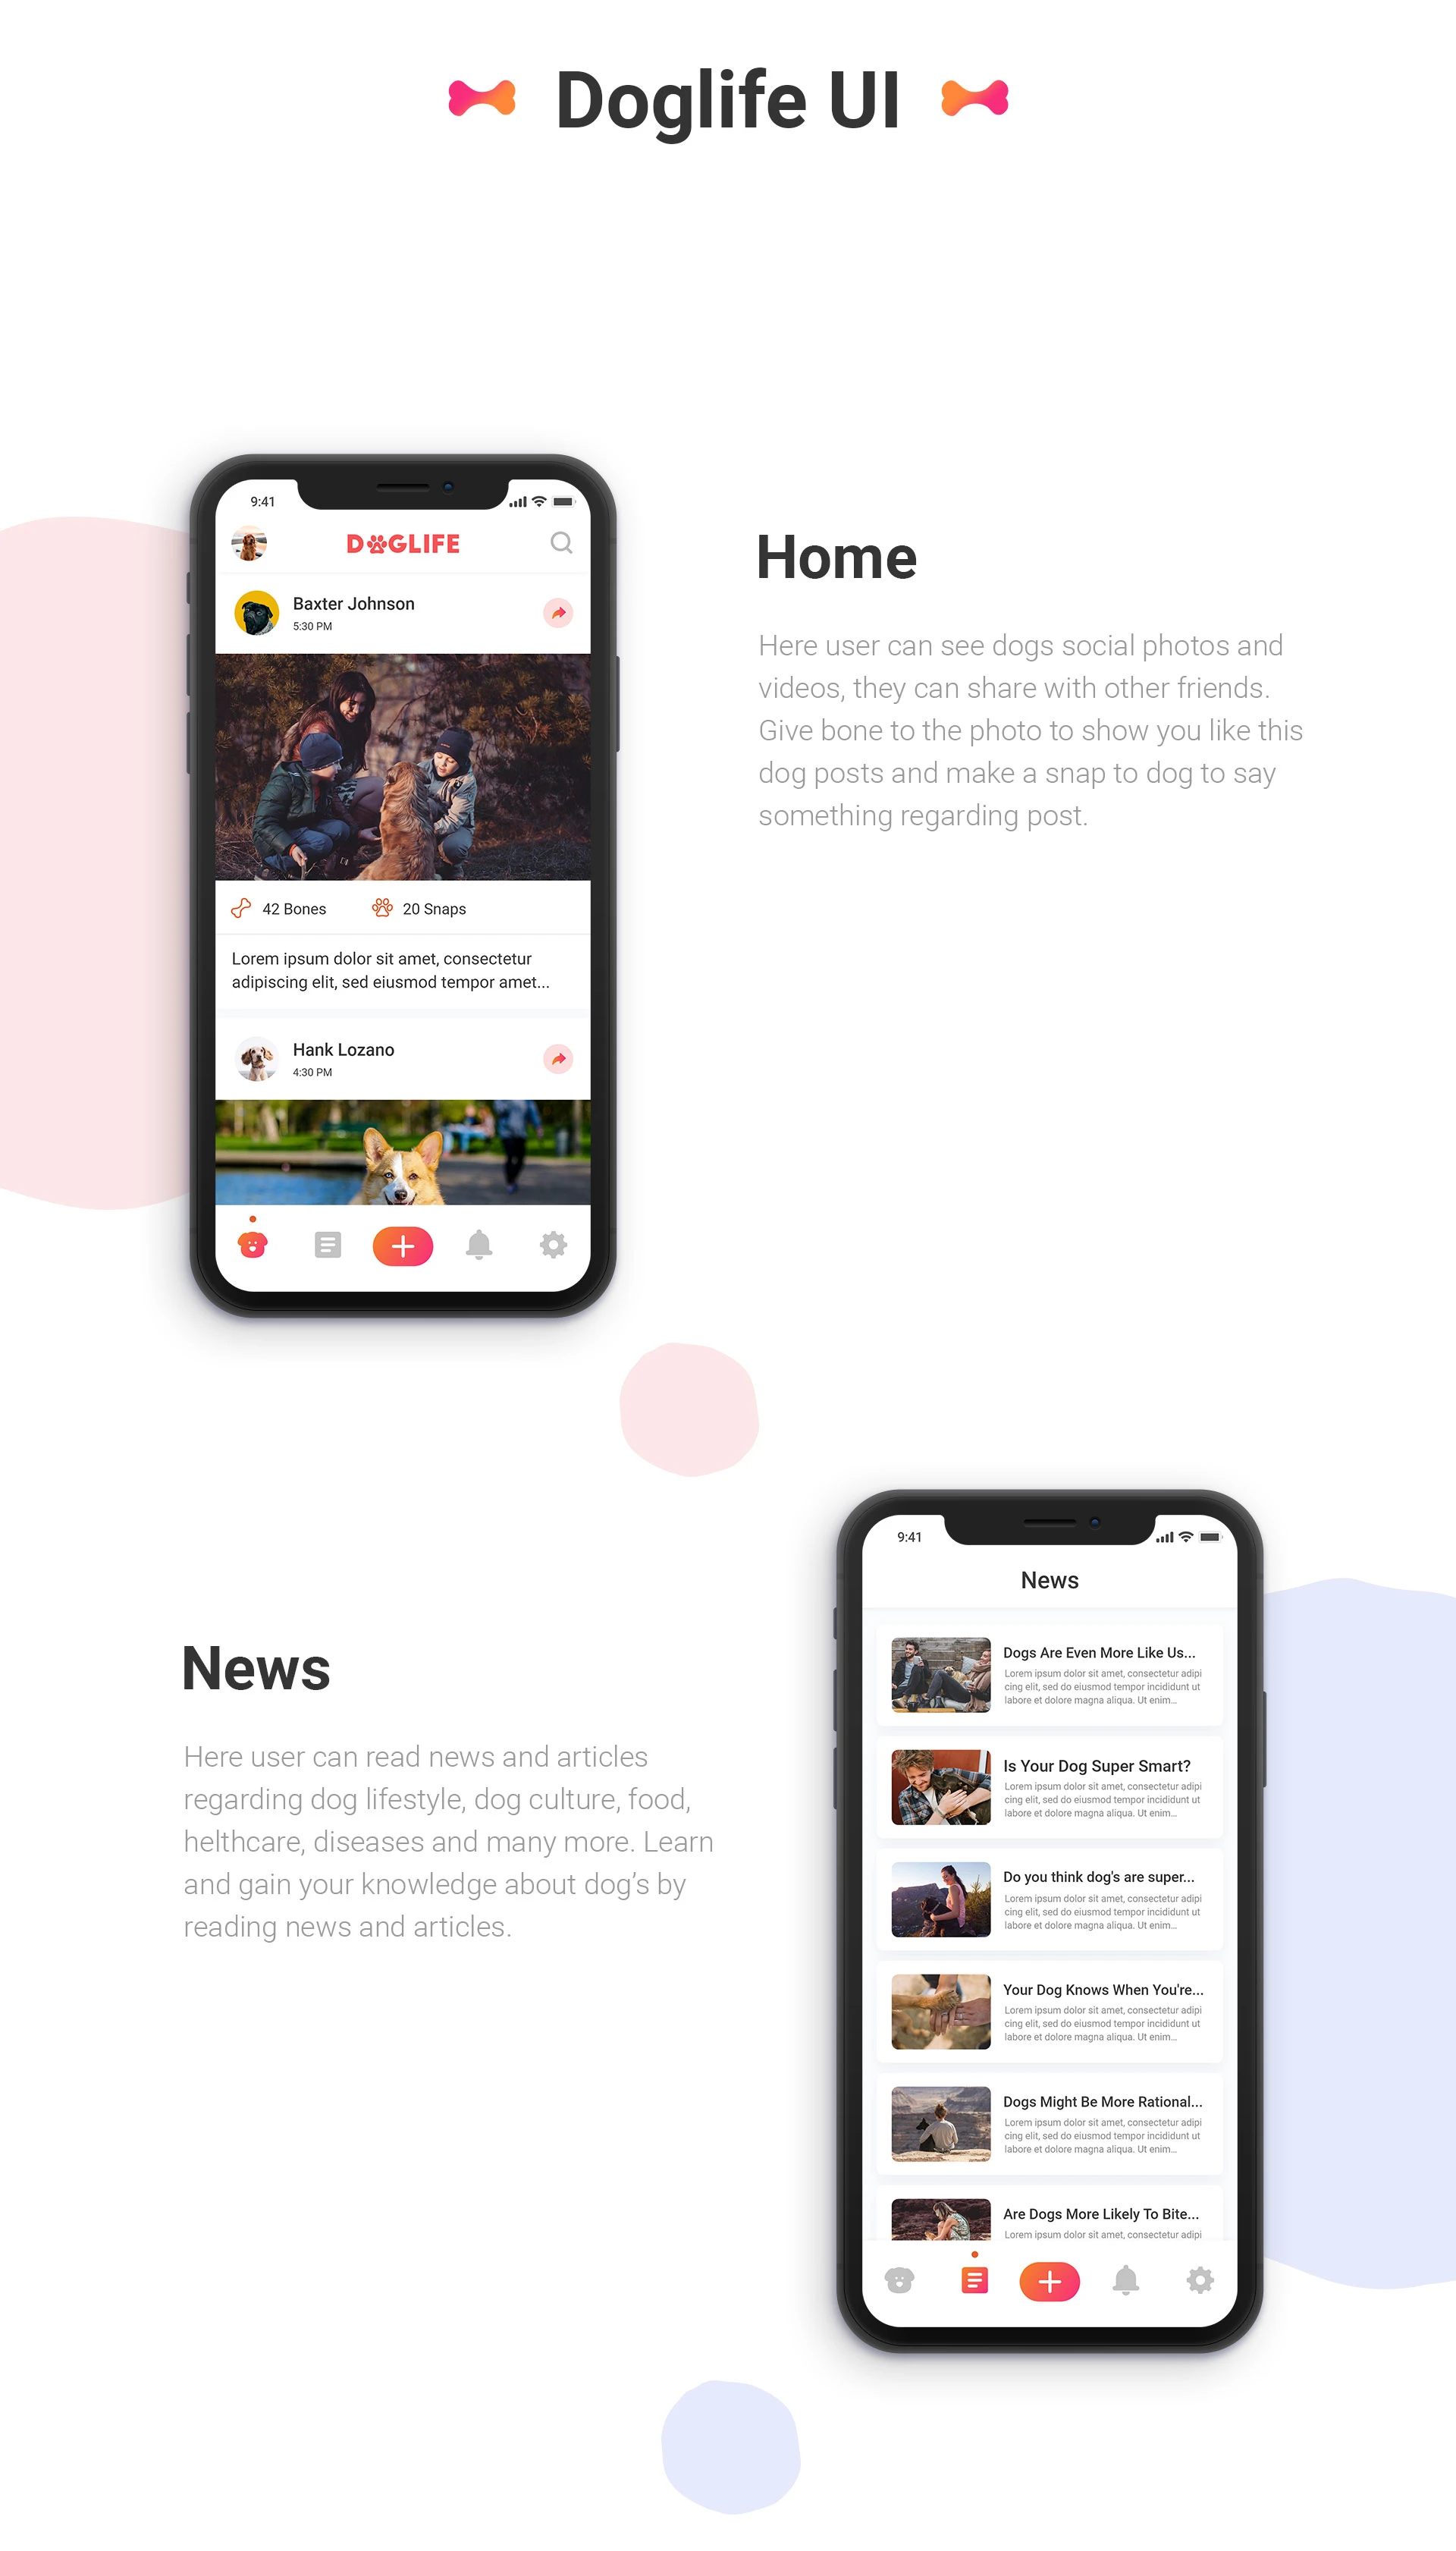 Doglife UI Kit Free for Adobe XD - Doglife is an app for dogs and dogs lovers, who loves to share photos of their dogs and dog's lifestyle. Minimal and clean app design, ready for you to get started.